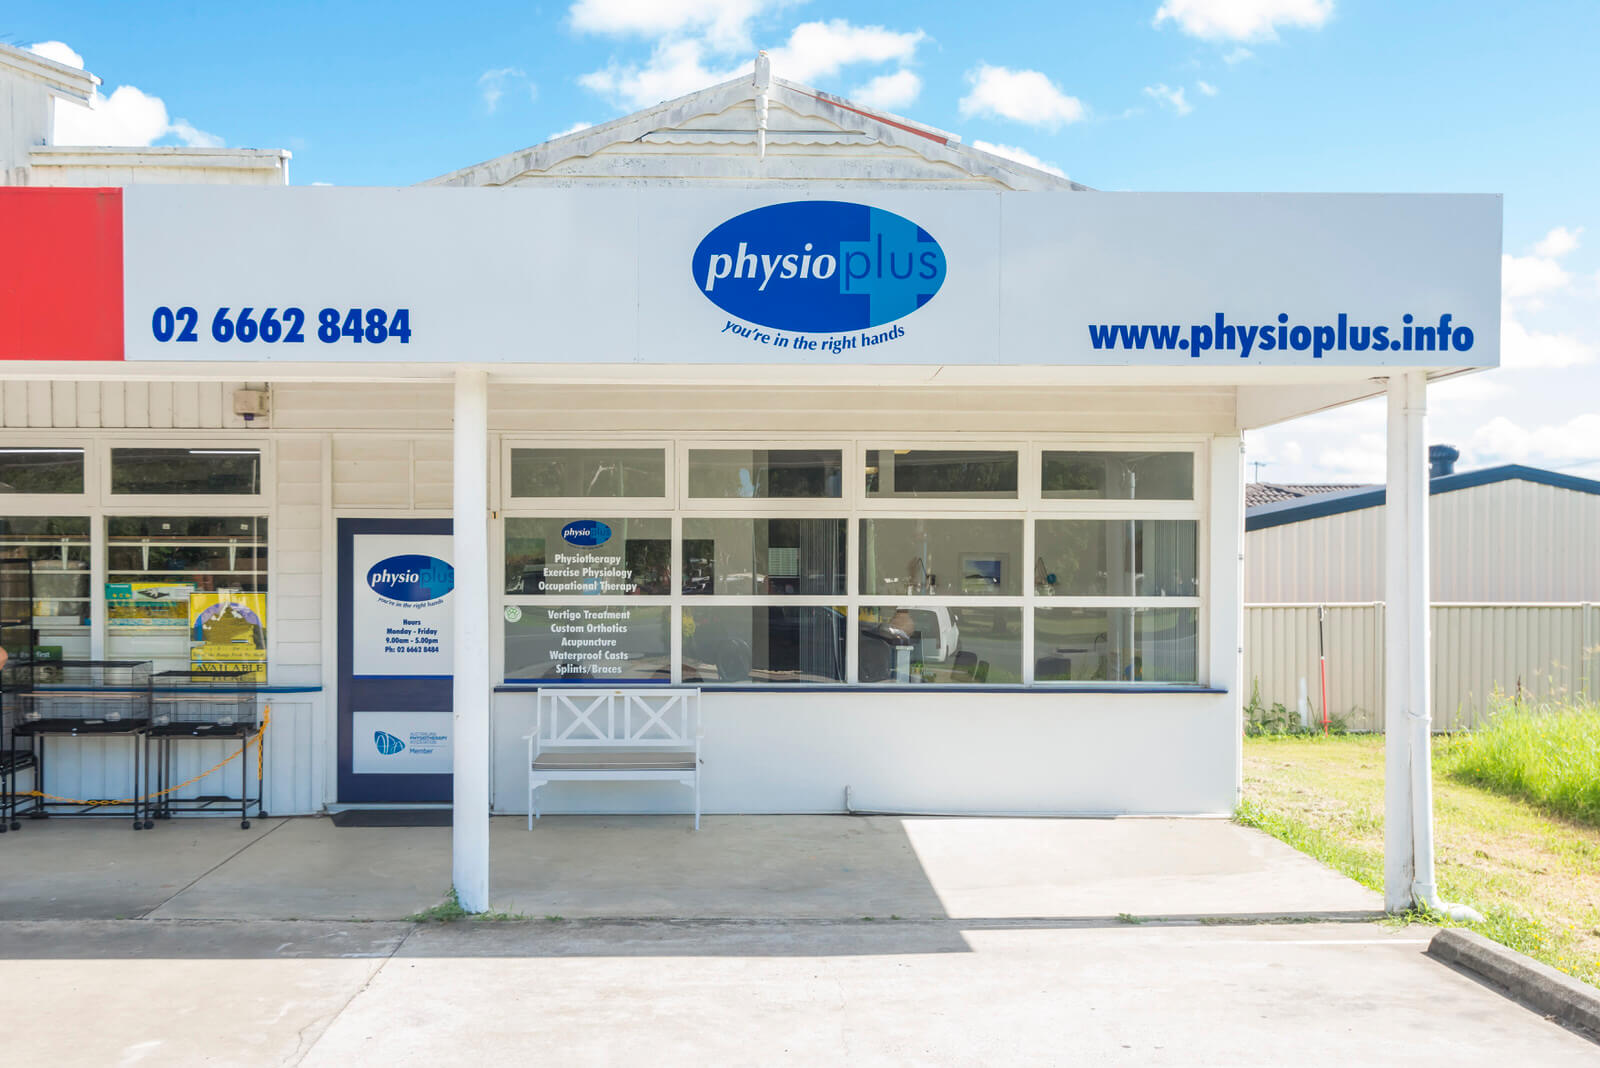 Physio Plus Physiotherapy in Casino